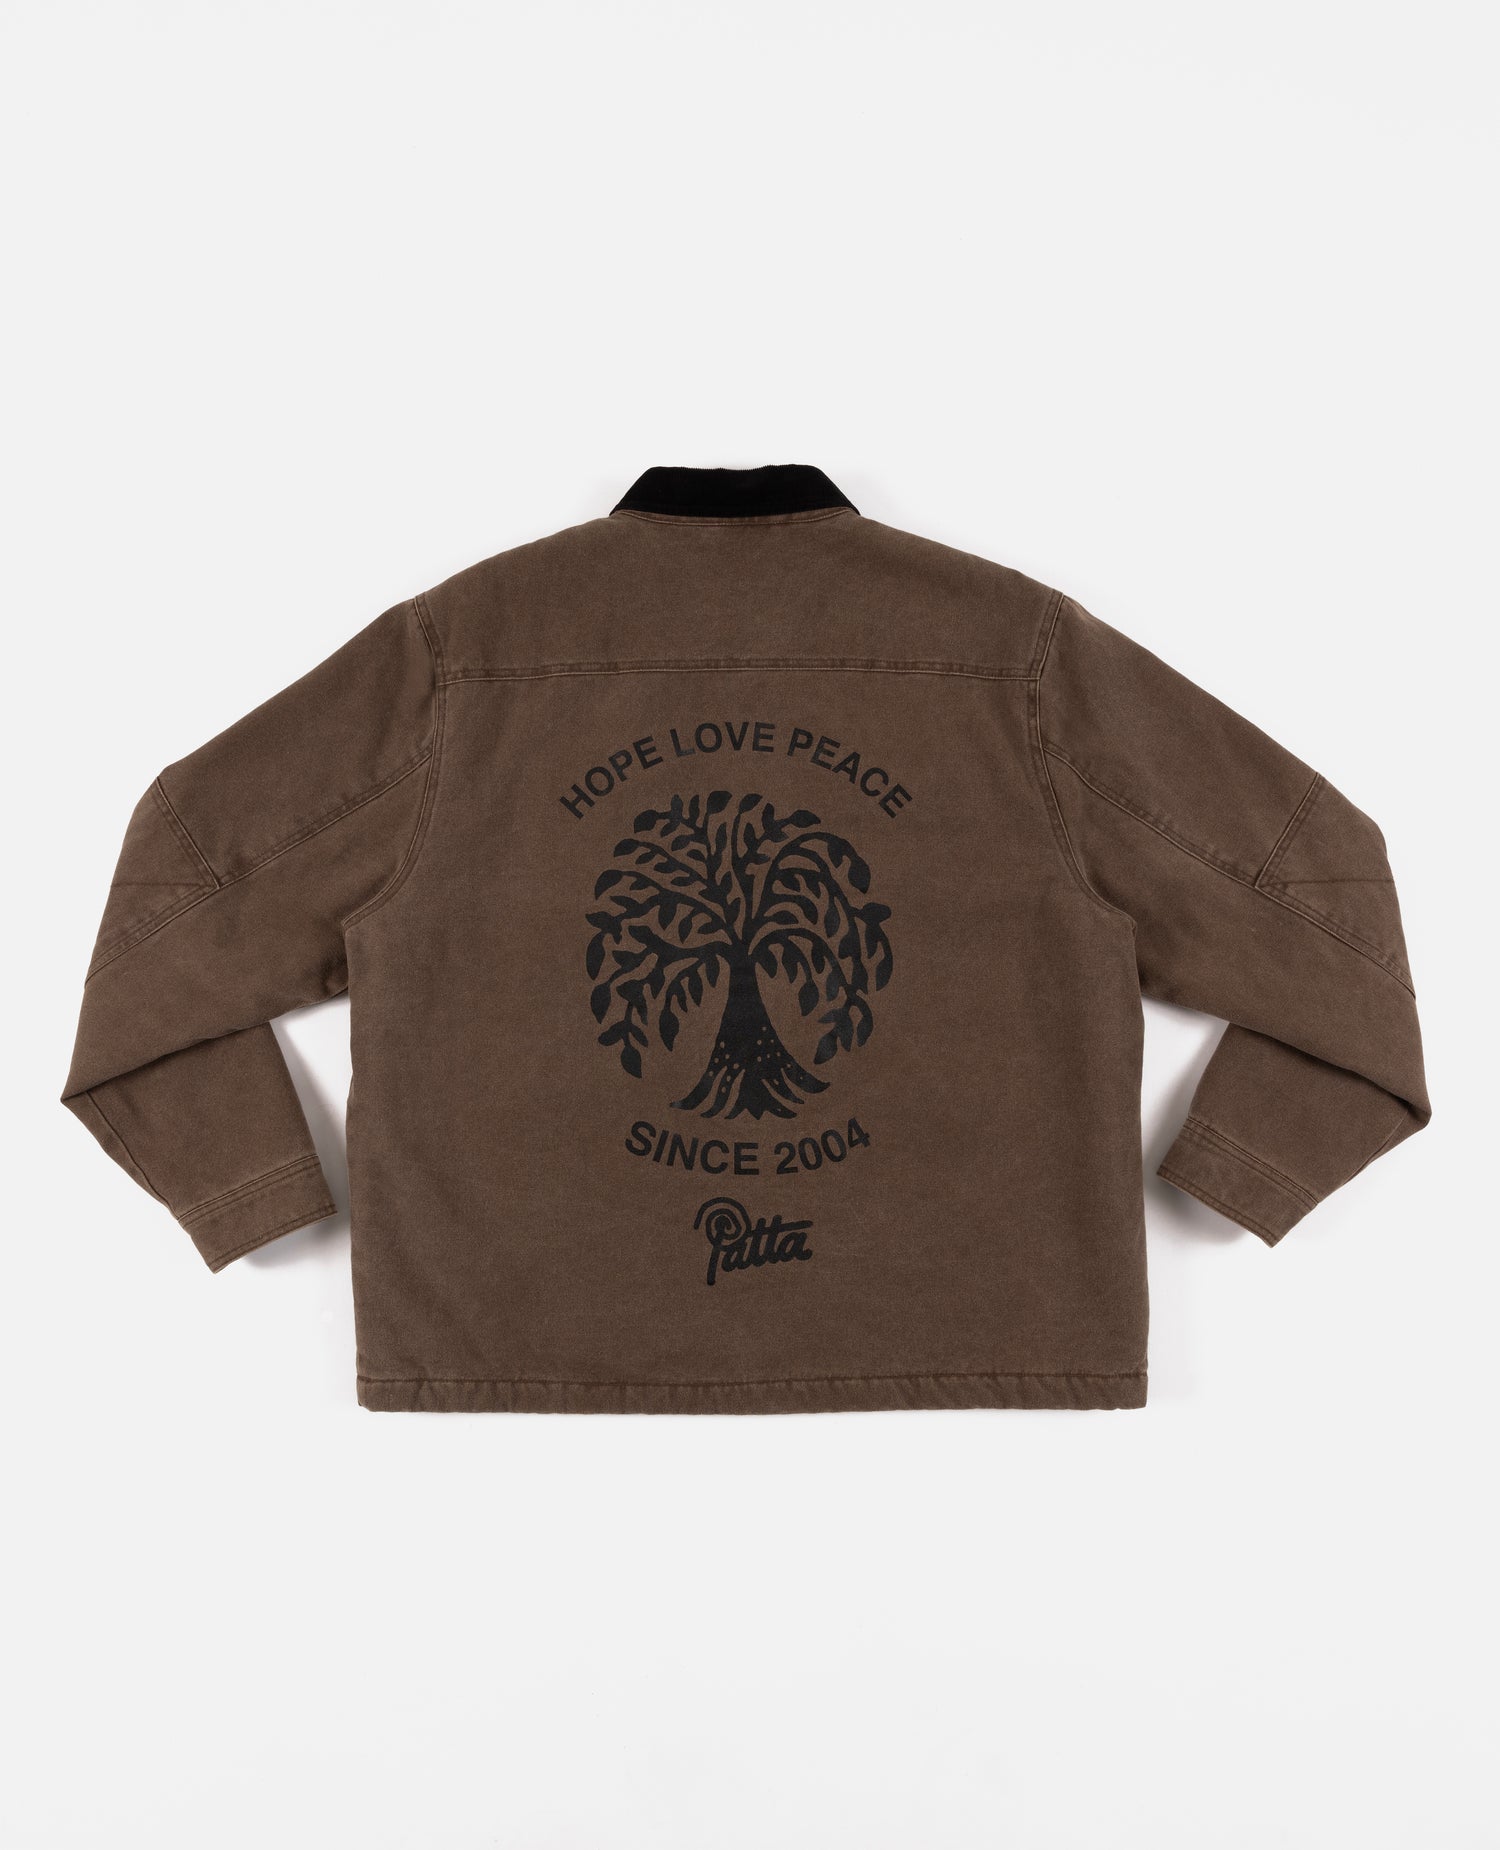 Patta Canvas Chore Jacket (Washed Brown)